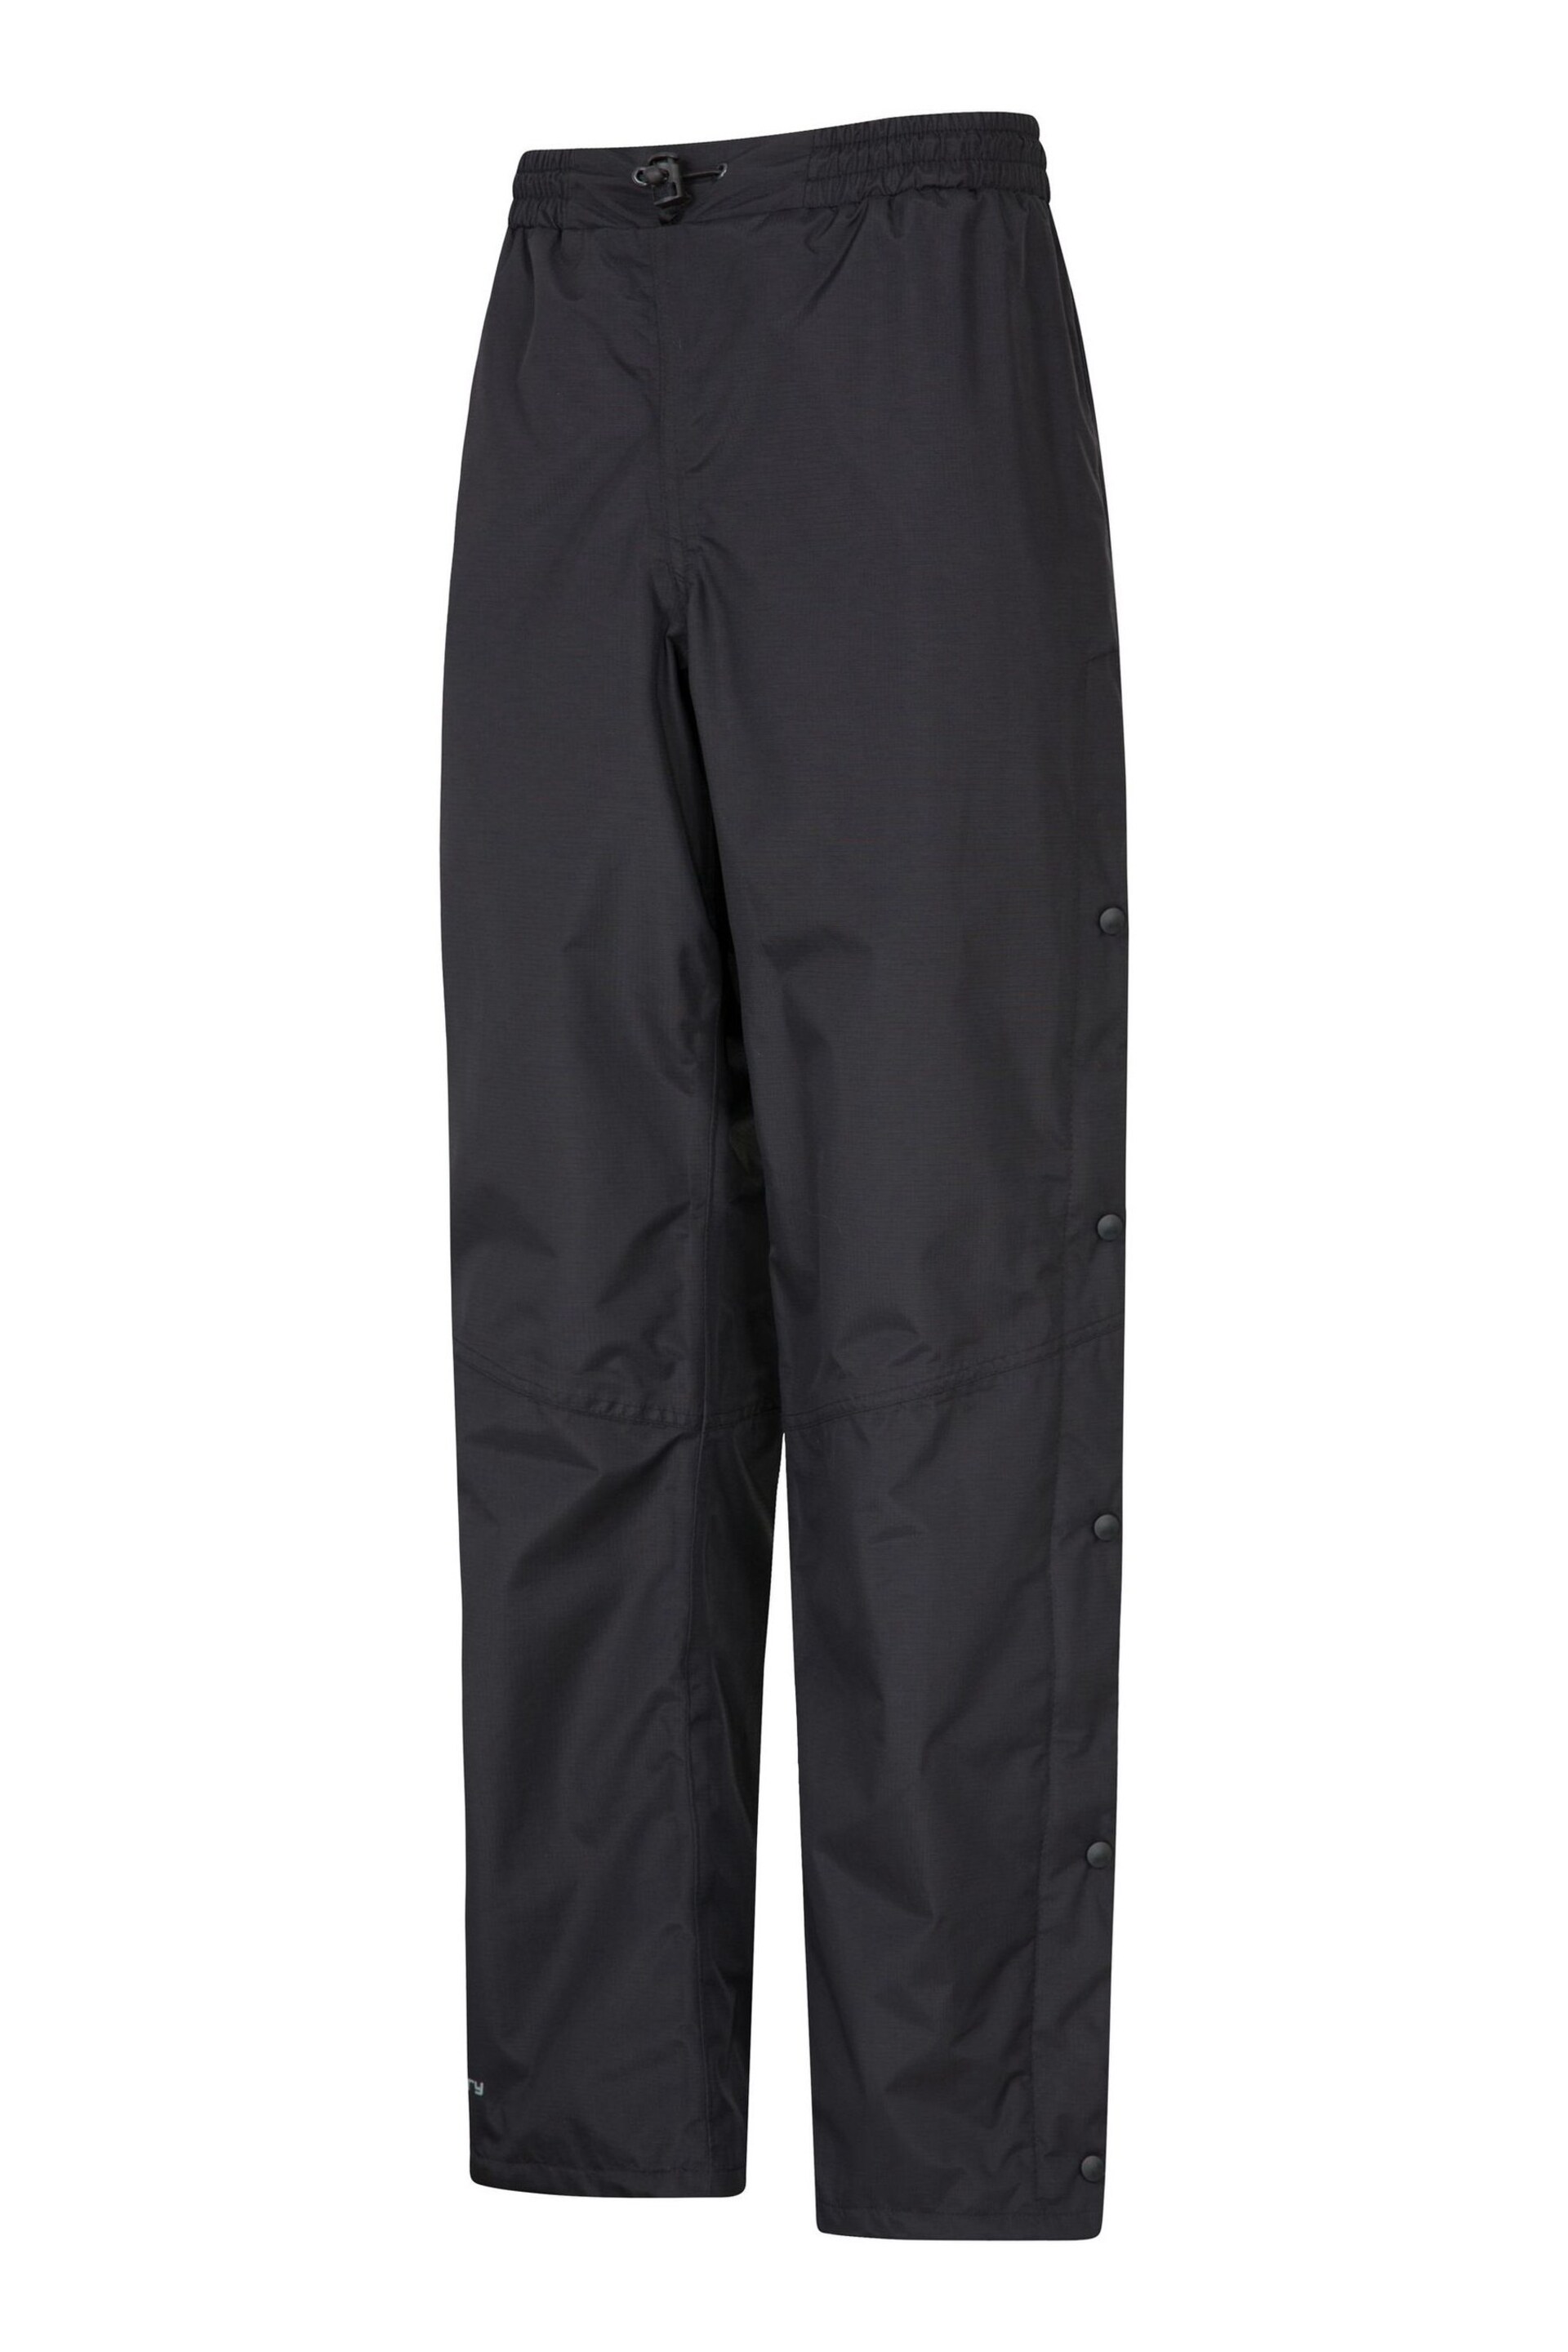 Mountain Warehouse Black Downpour Womens Short Length Waterproof Trousers - Image 3 of 5